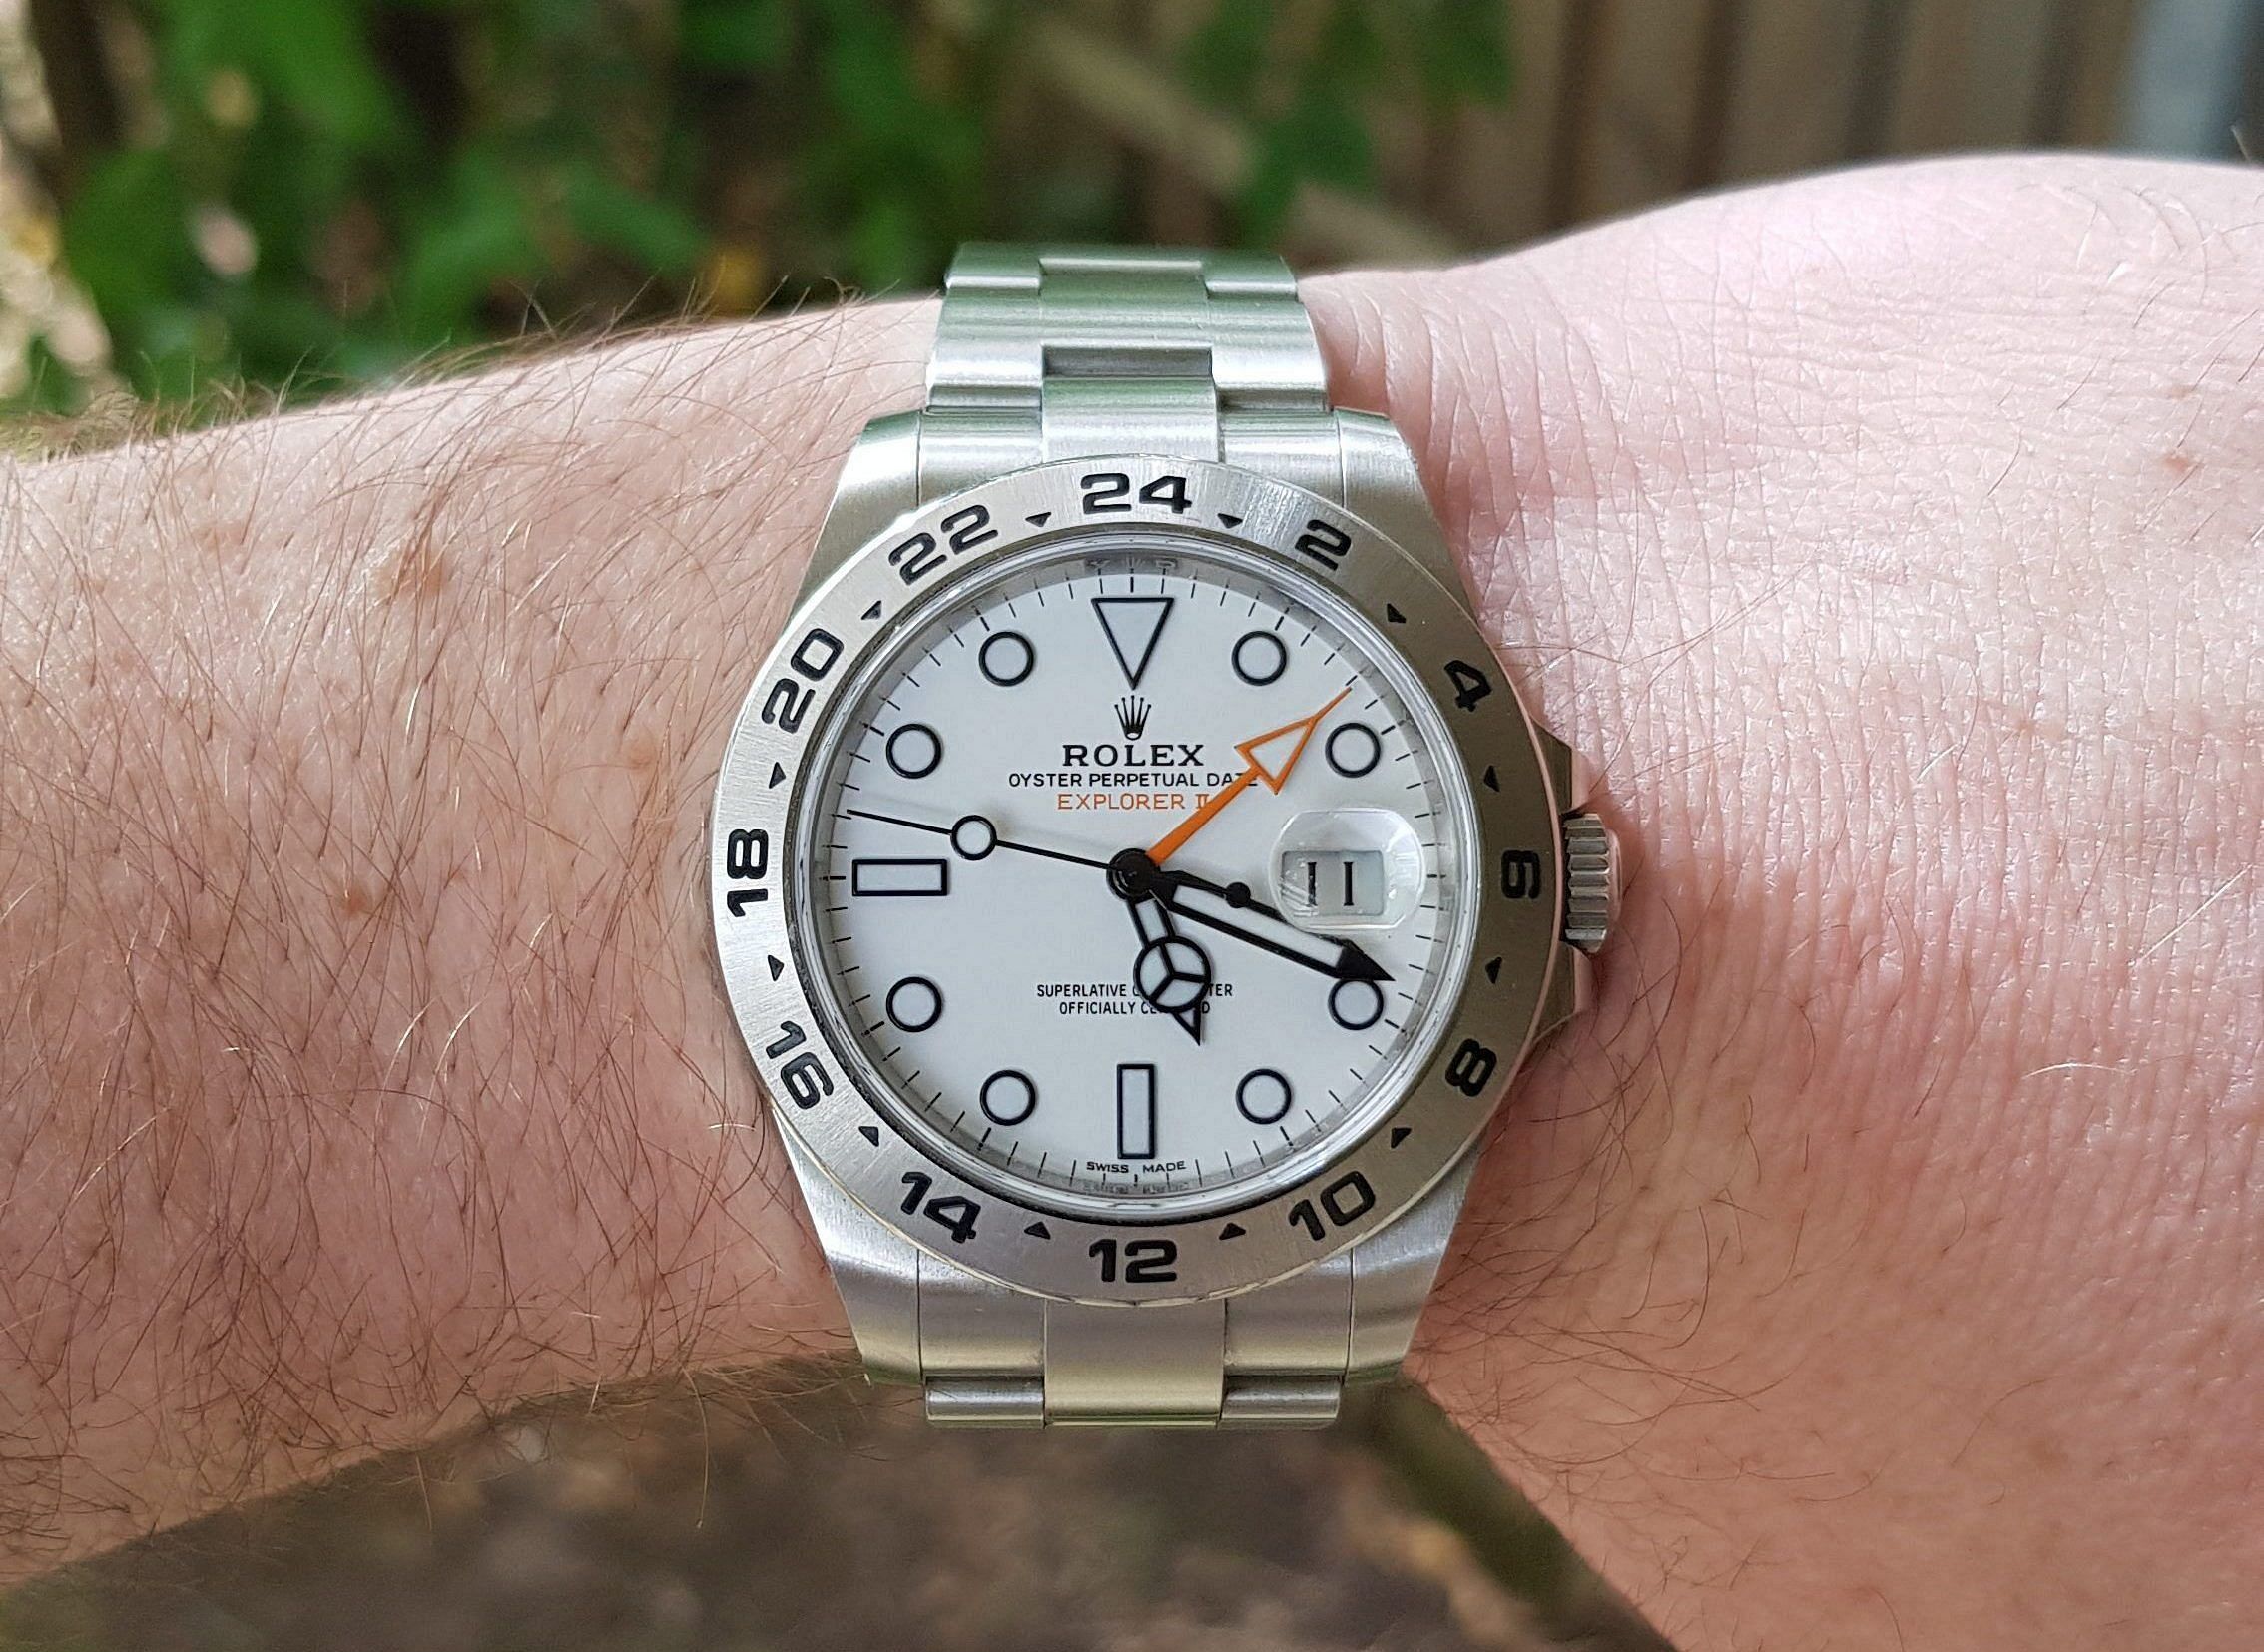 Weekend watch spotting with JR